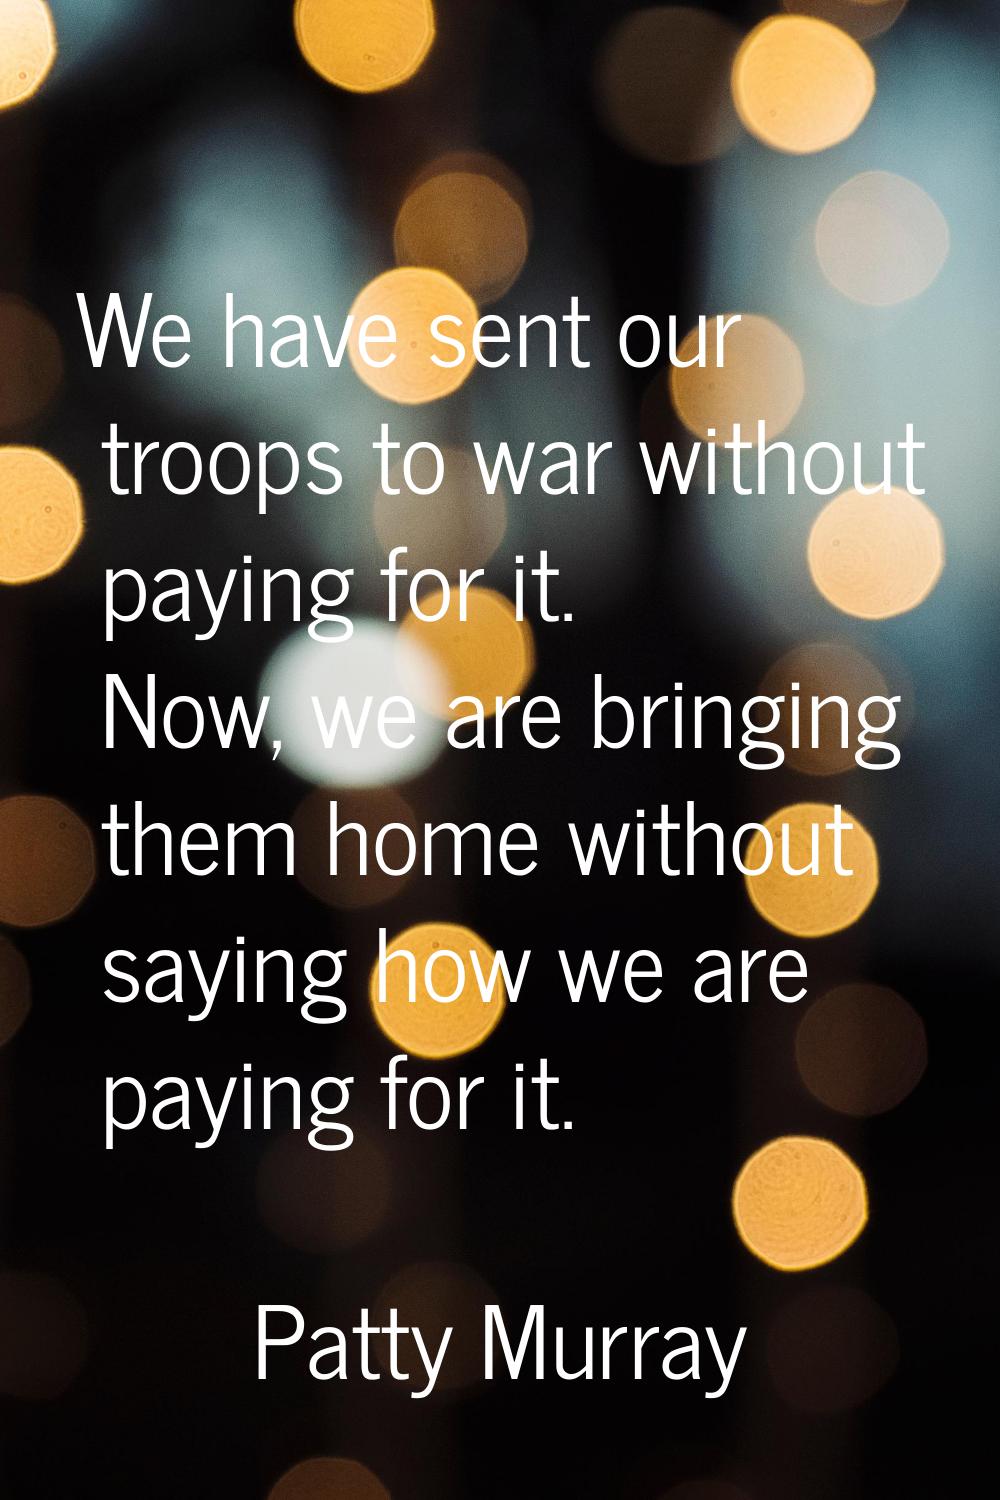 We have sent our troops to war without paying for it. Now, we are bringing them home without saying